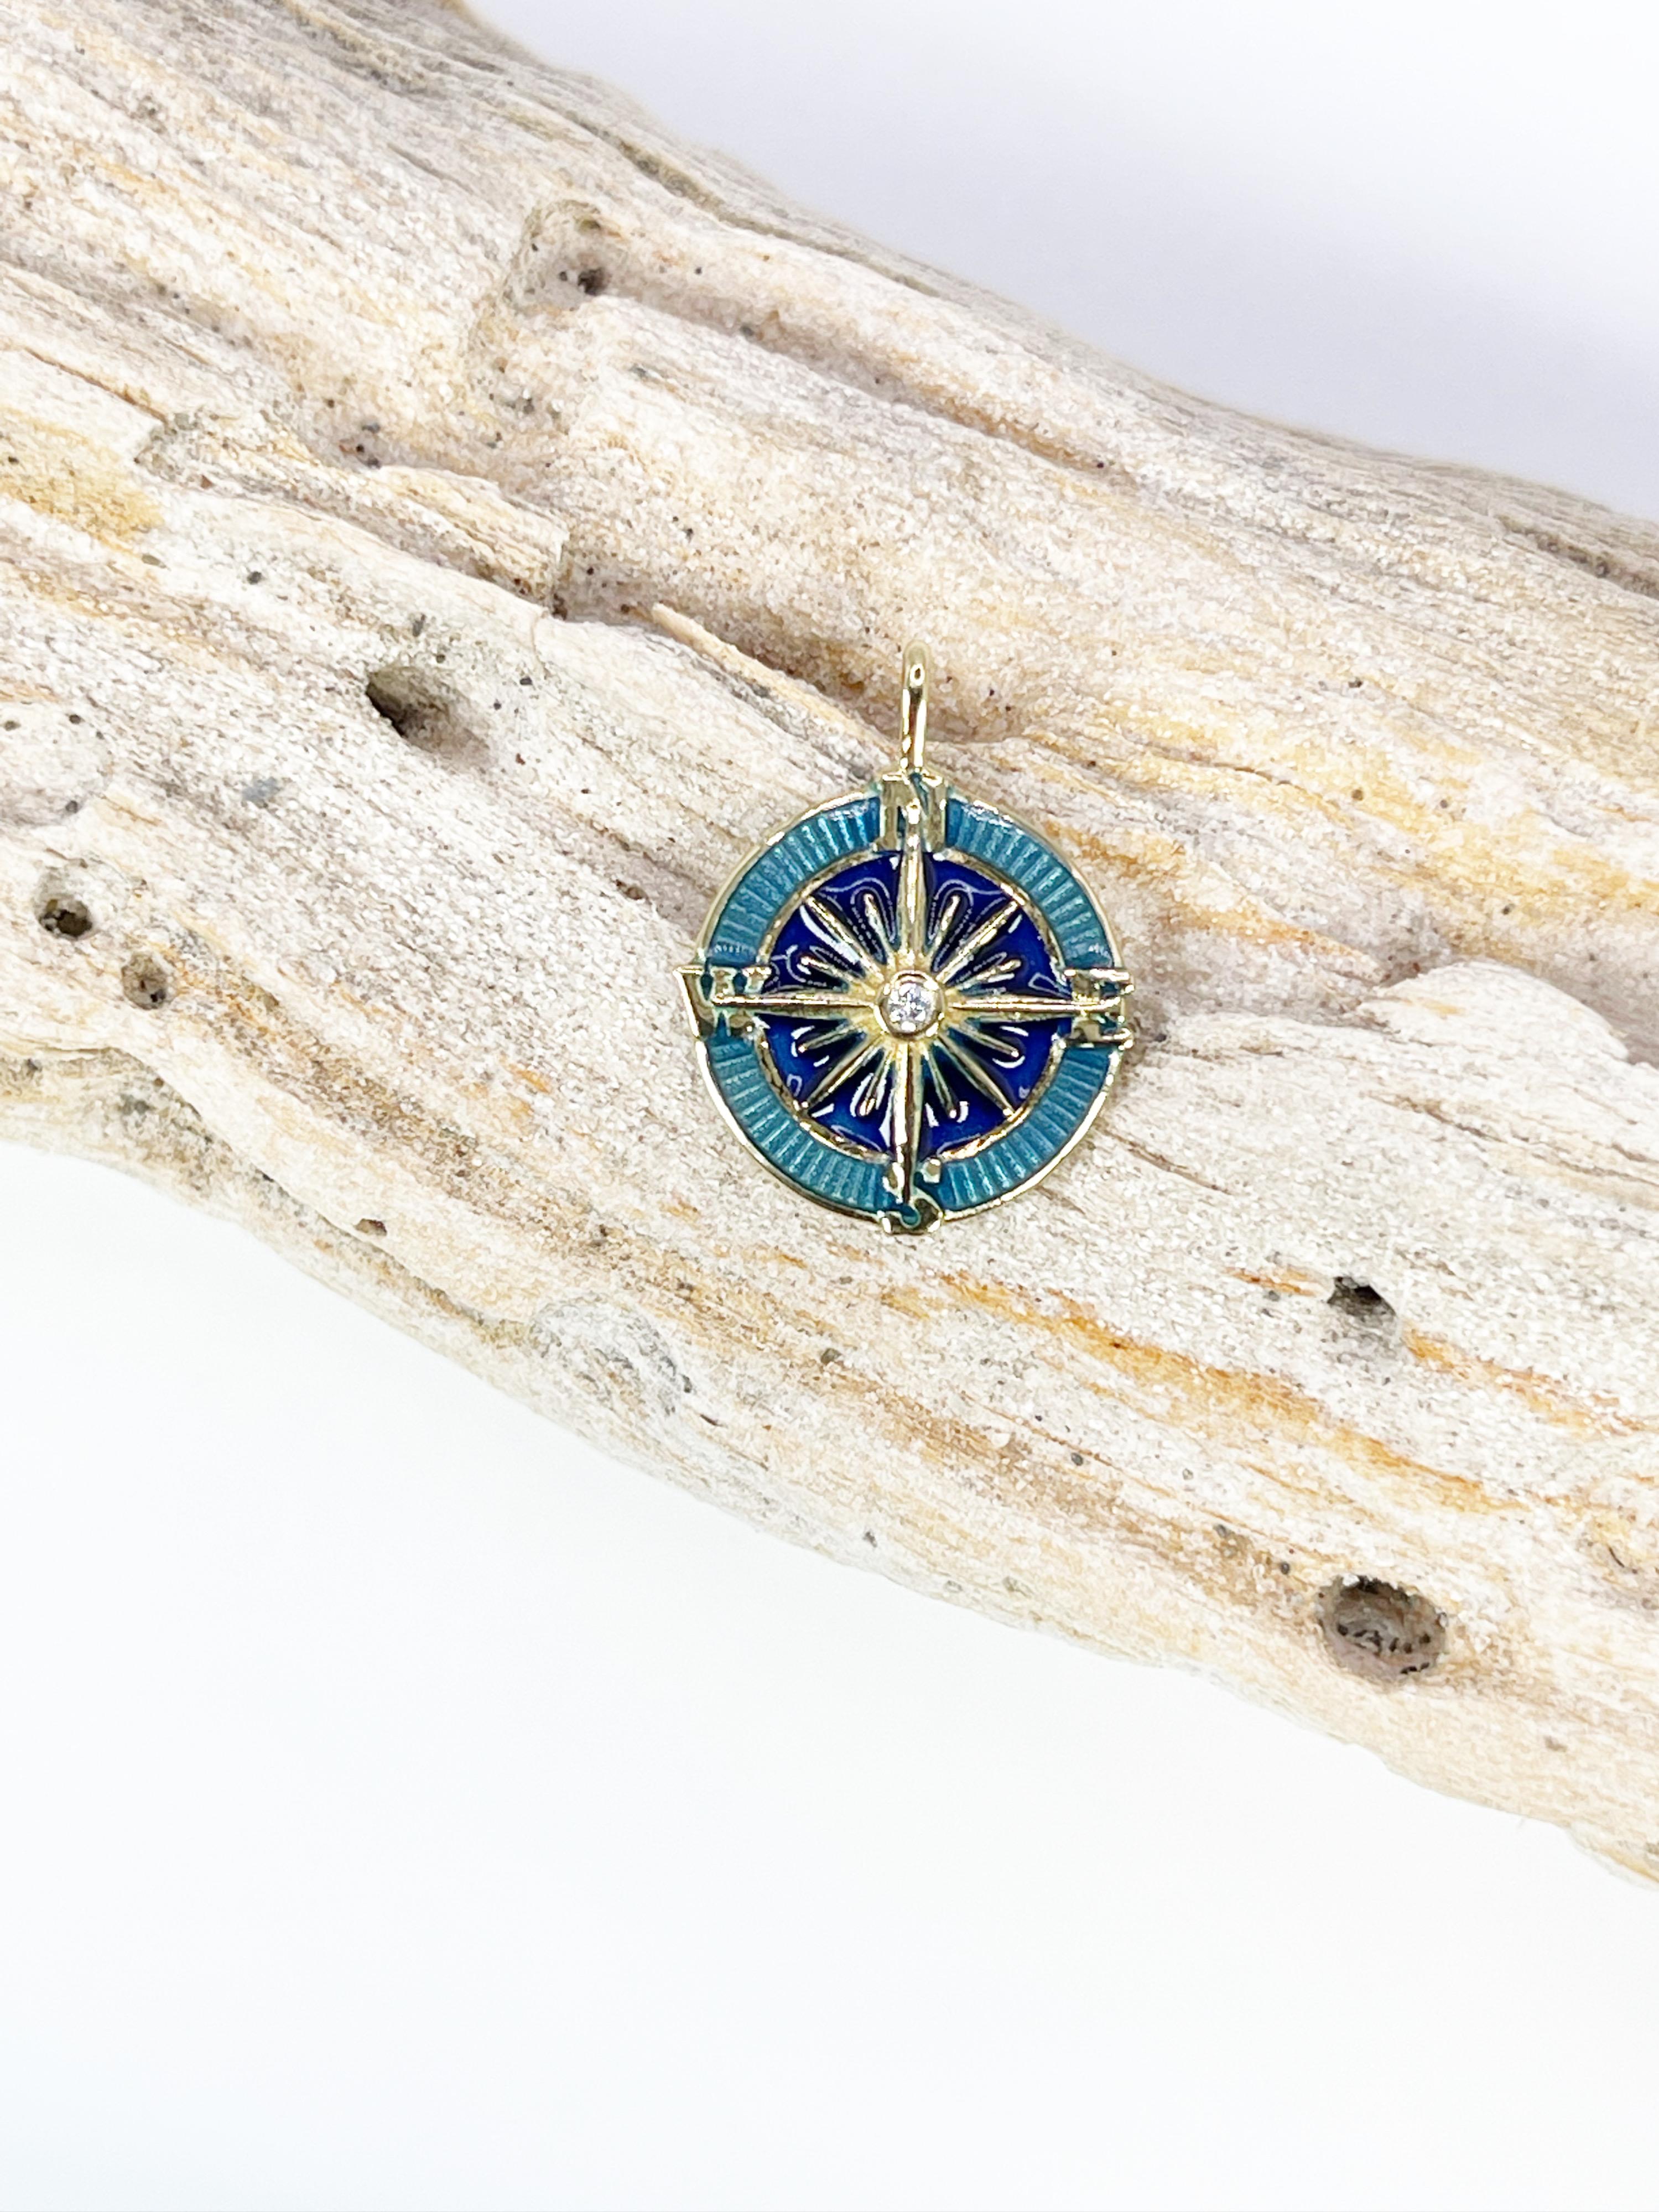 Exquisite and rare vitreous blue enamel pendant in 18KT yellow gold accompanied by a center diamond 1.8mm. Pendant is unisex.

GRAM WEIGHT (pendant only): 2.20gr
GOLD: 18KT yellow gold
CHAIN: 18